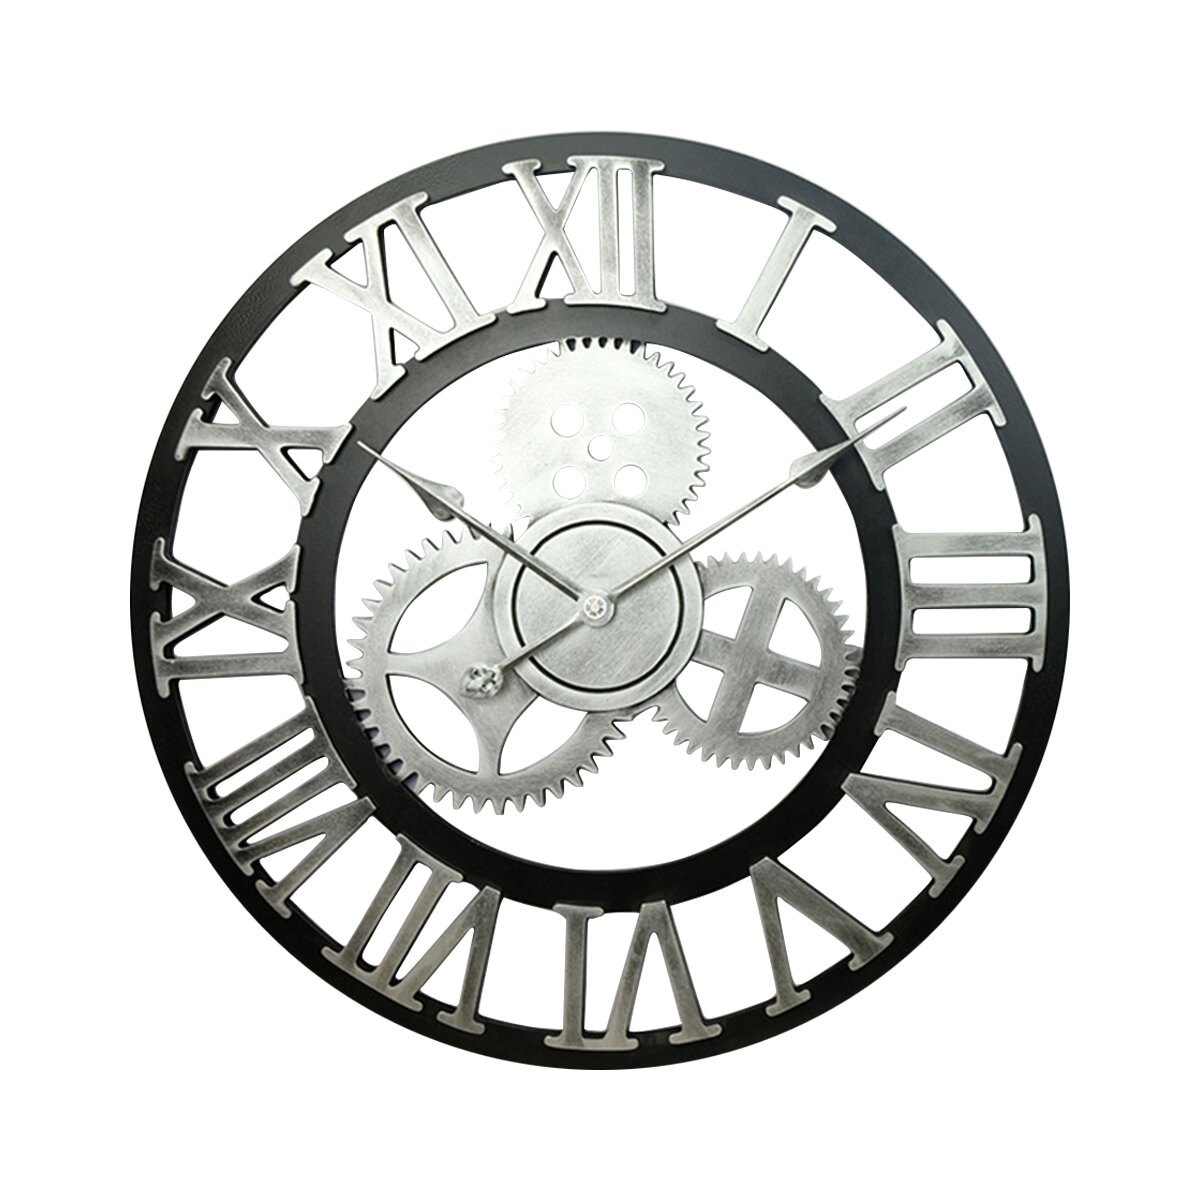 Image of Vintage Handmade Clock Large Gear Wall Clock Rustic Wooden Luxury Art Home Decoration